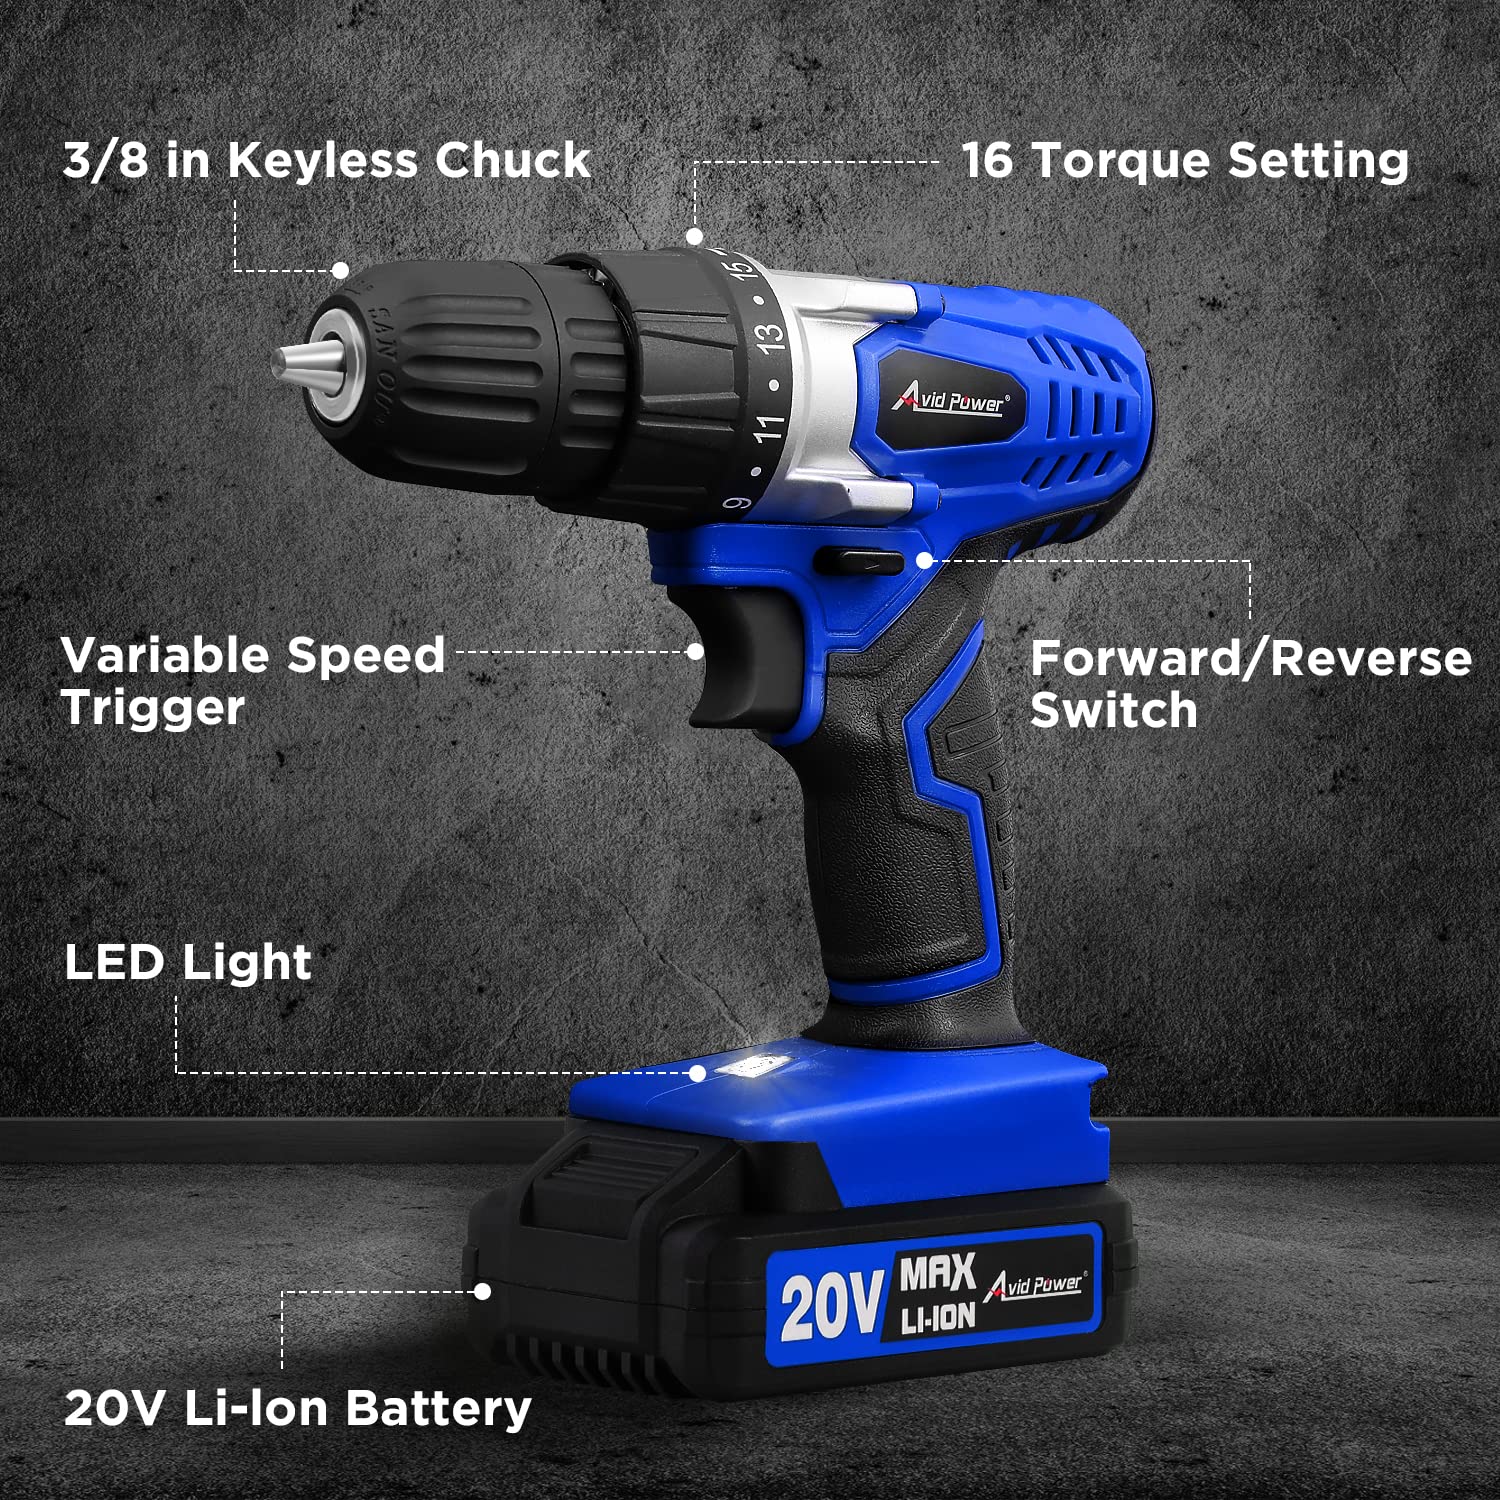 AVID POWER 20V MAX Lithium lon Cordless Drill Set, Power Drill Kit with Battery and Charger, 3/8-Inch Keyless Chuck, Variable Speed, 16 Position and 22pcs Drill Bits (Blue)